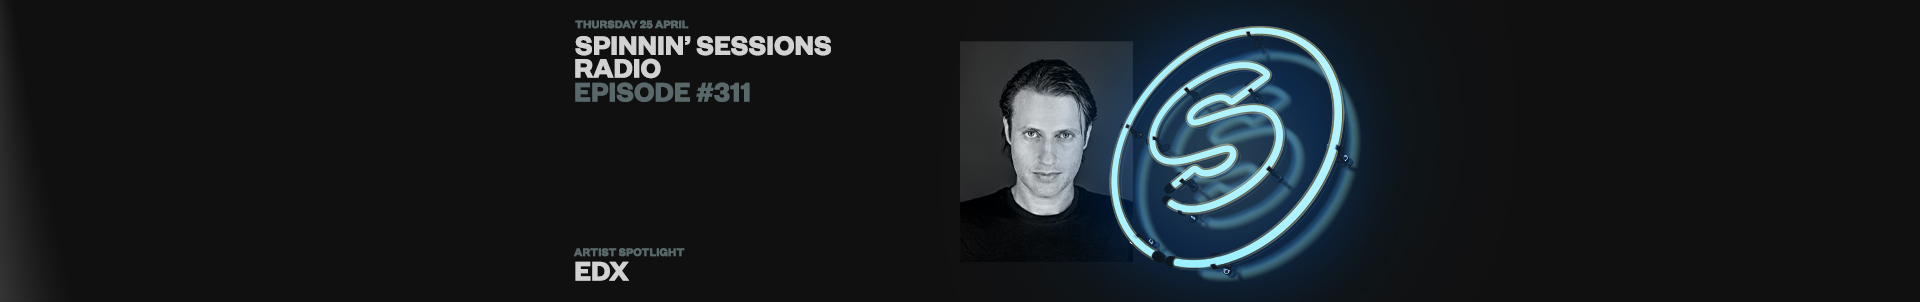 Spinnin' Sessions radio show episode #311 with EDX!